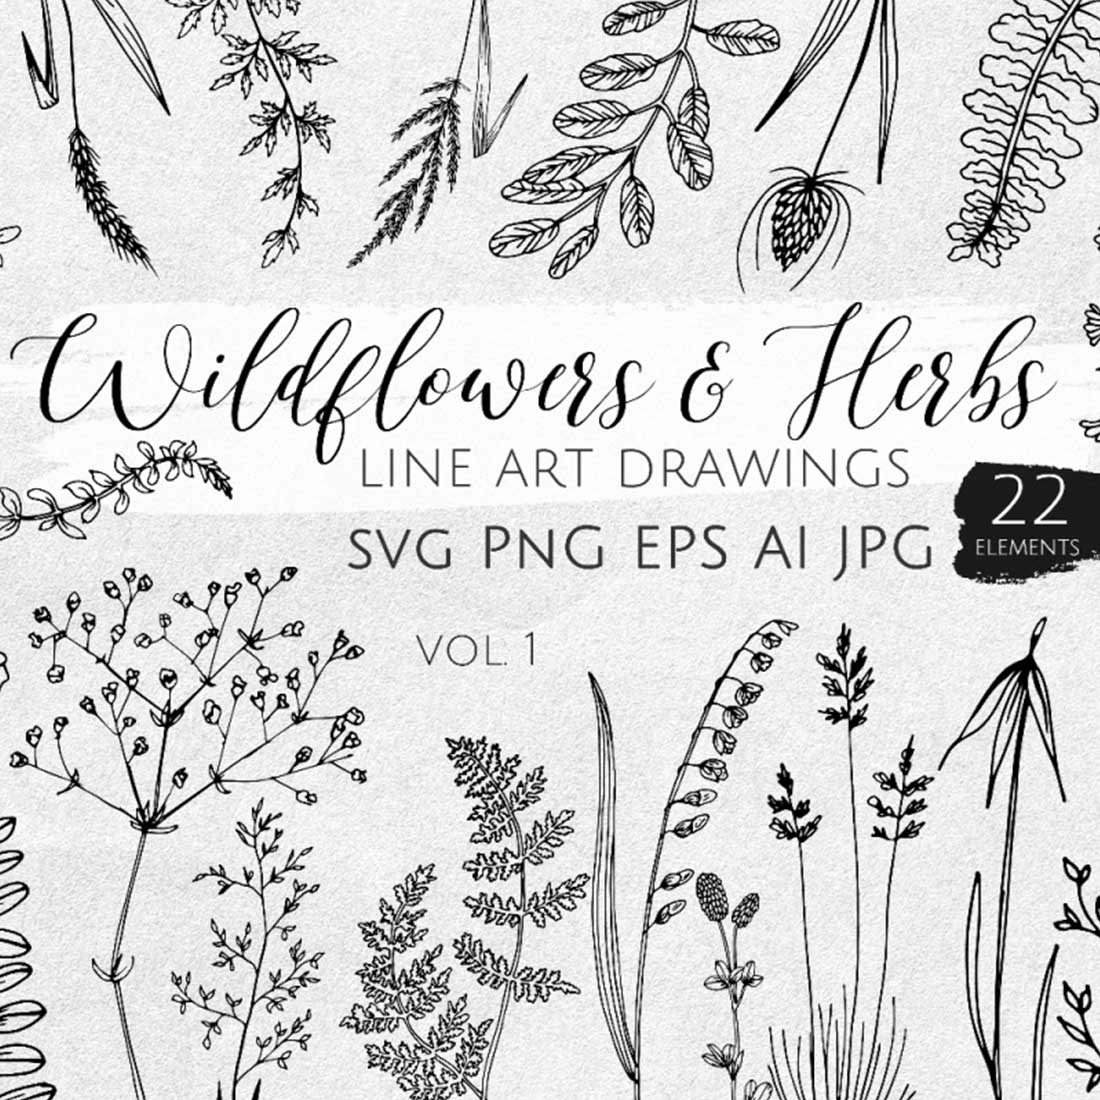 22 Wildflowers & Herbs SVG Line Art cover image.